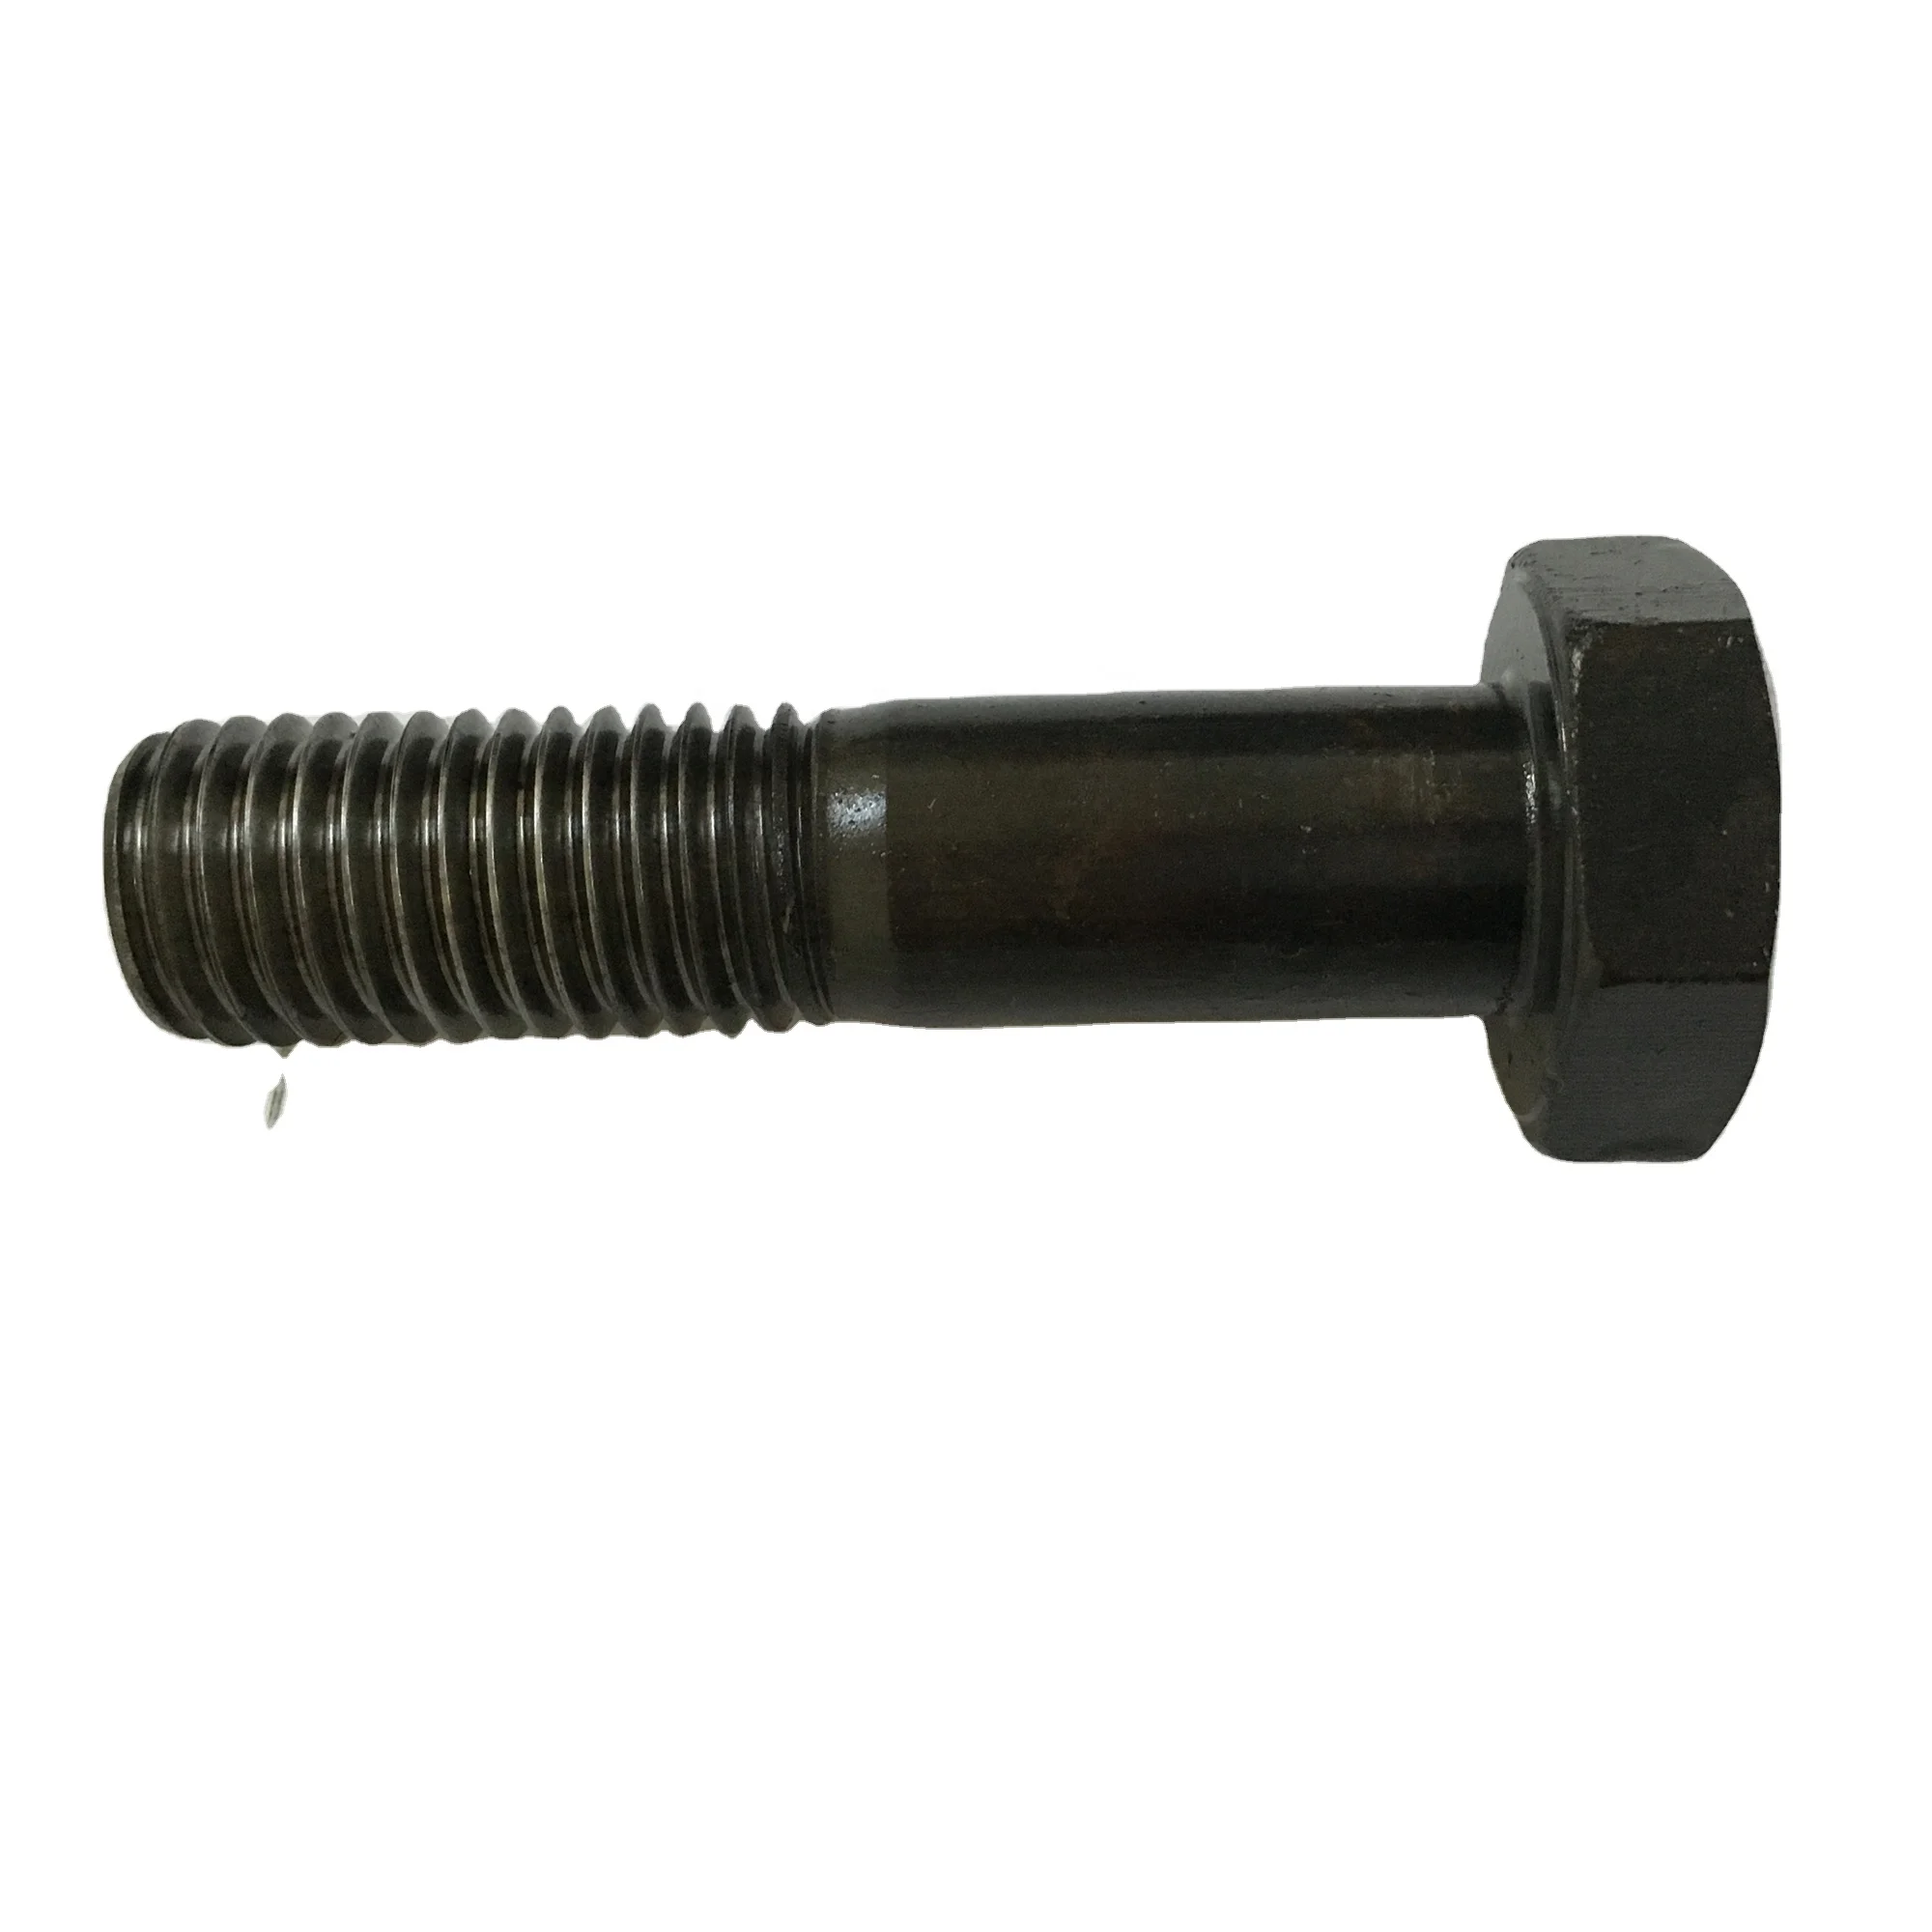 
Hexagon bolt a325 structural bolt half thread bolt with nut and washer for steel structure 